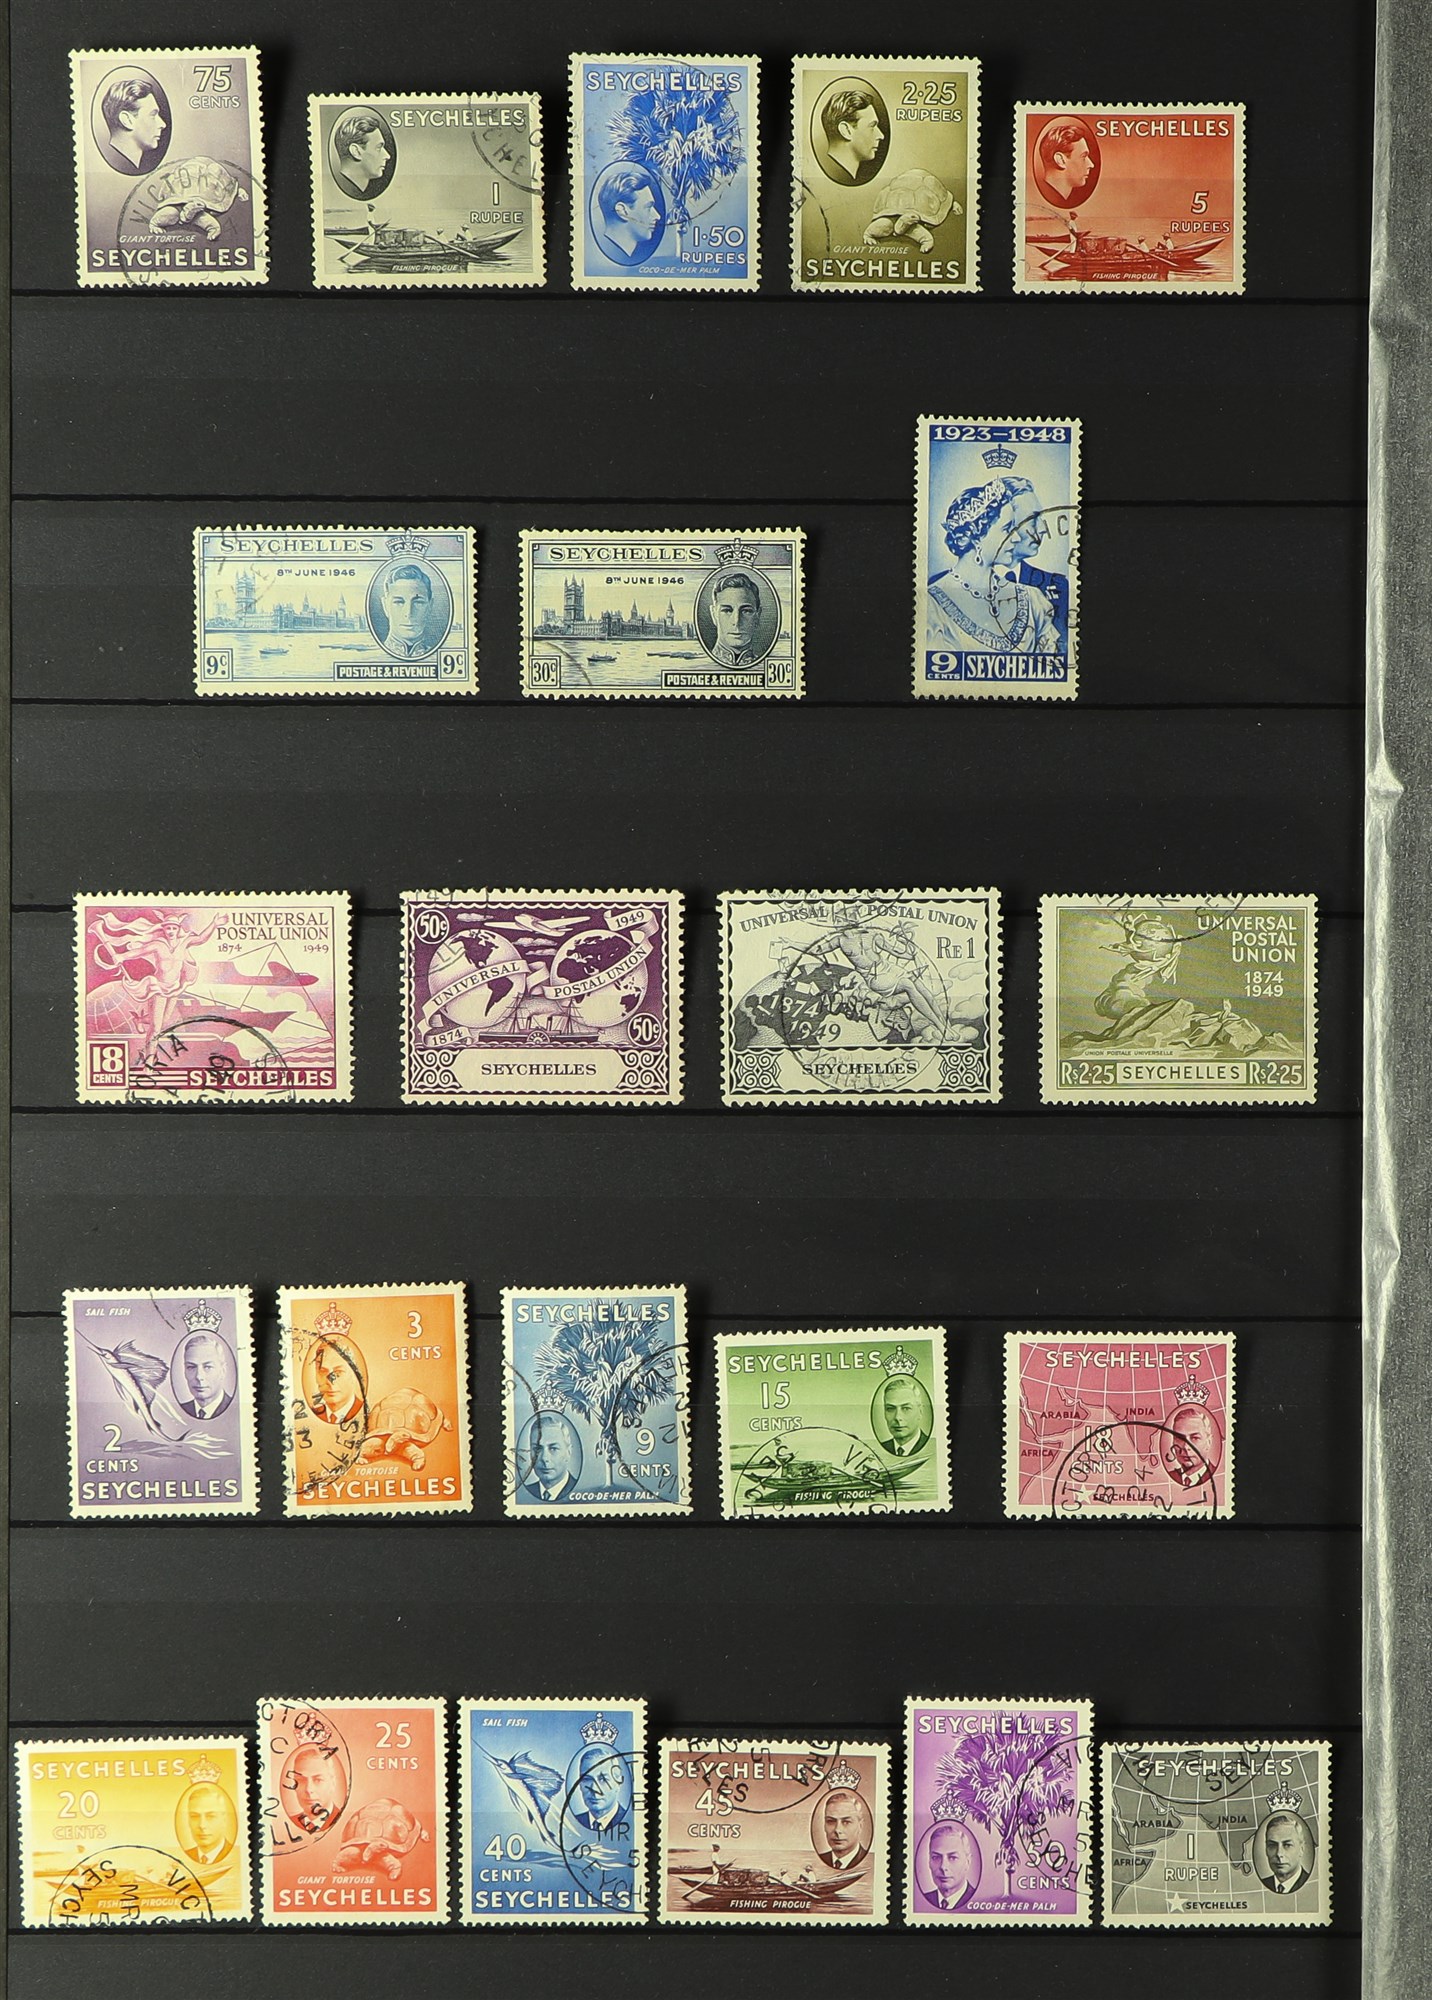 SEYCHELLES 1890 - 1952 COLLECTION of over 130 used stamps on protective pages, comprehensive incl - Image 4 of 4